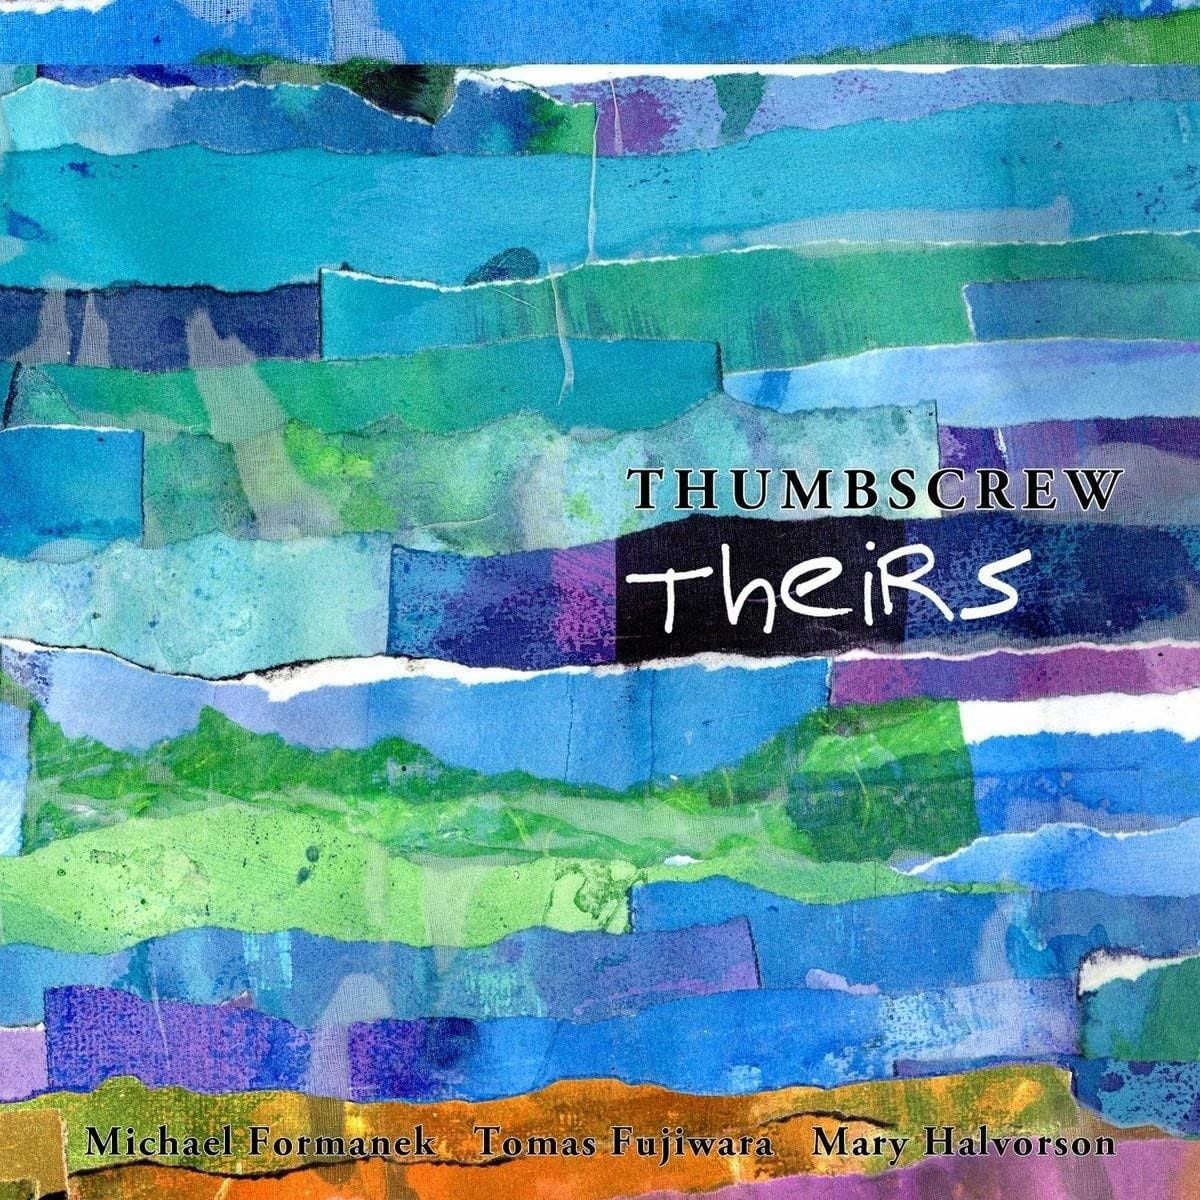 Thumbscrew Prove They Are Bigger Than Any One Star-Player on ‘Ours / Theirs’